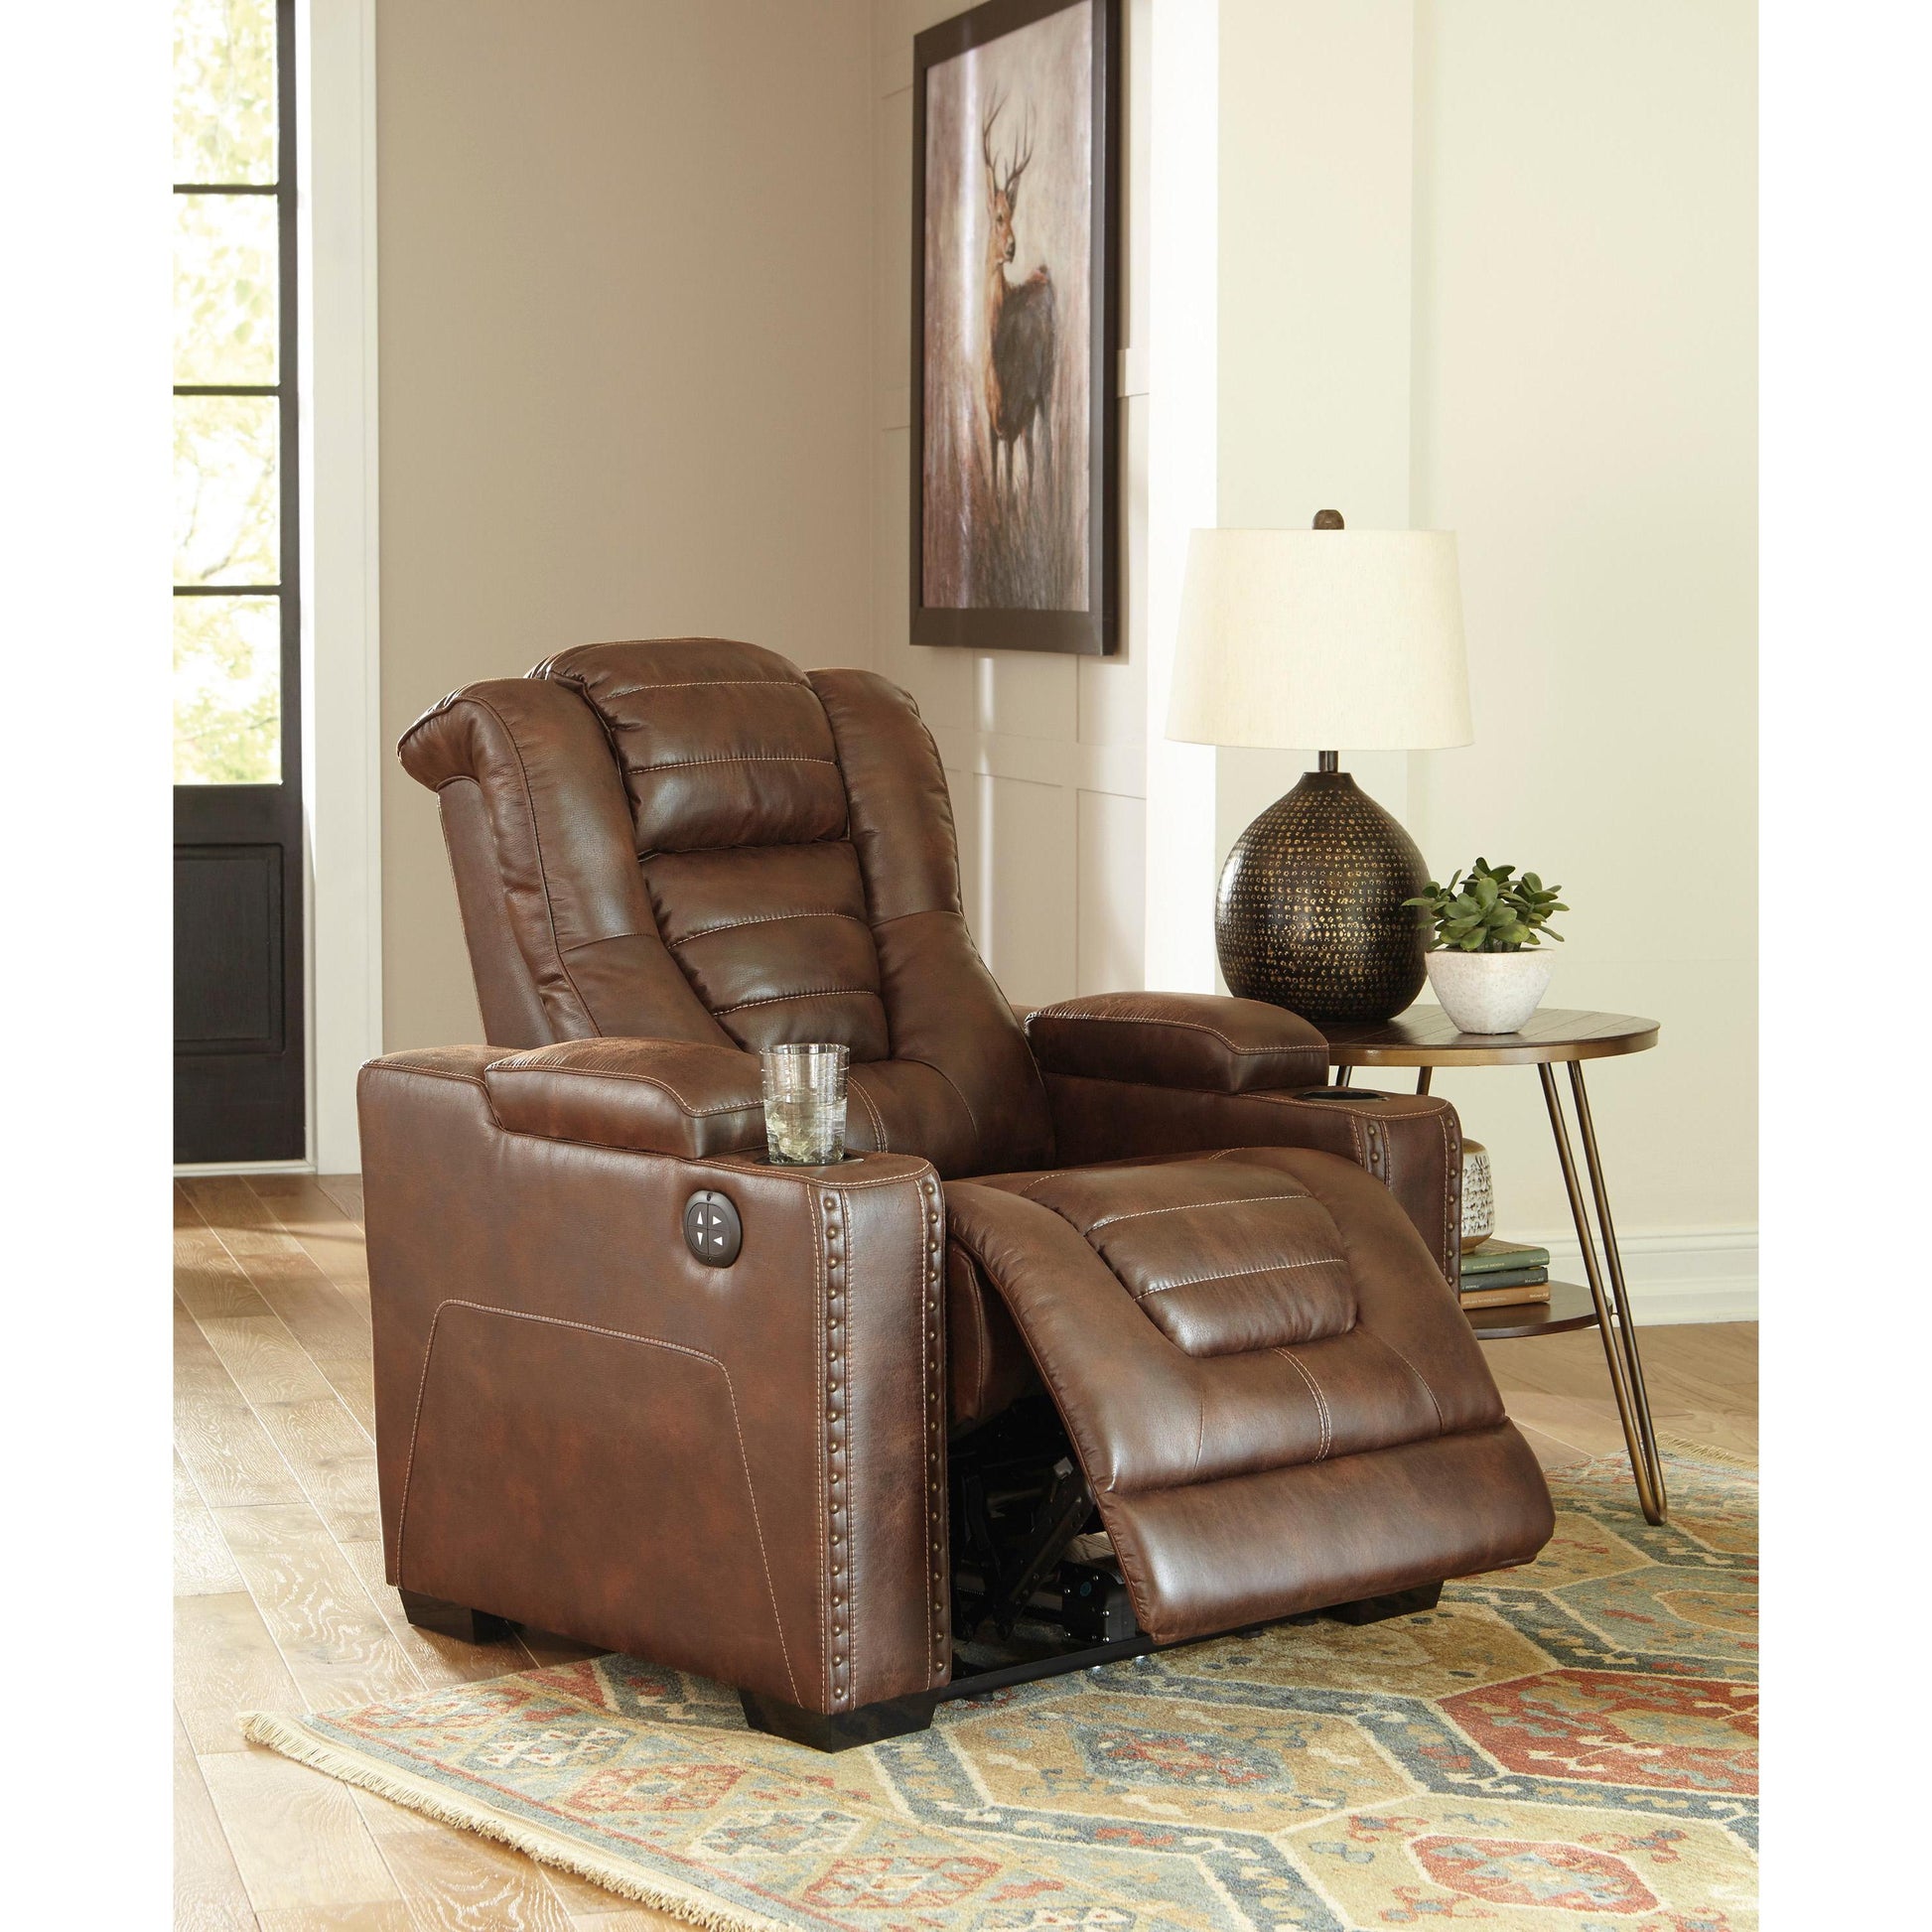 Signature Design by Ashley Owner's Box 24505 3 pc Power Reclining Living Room Set IMAGE 4